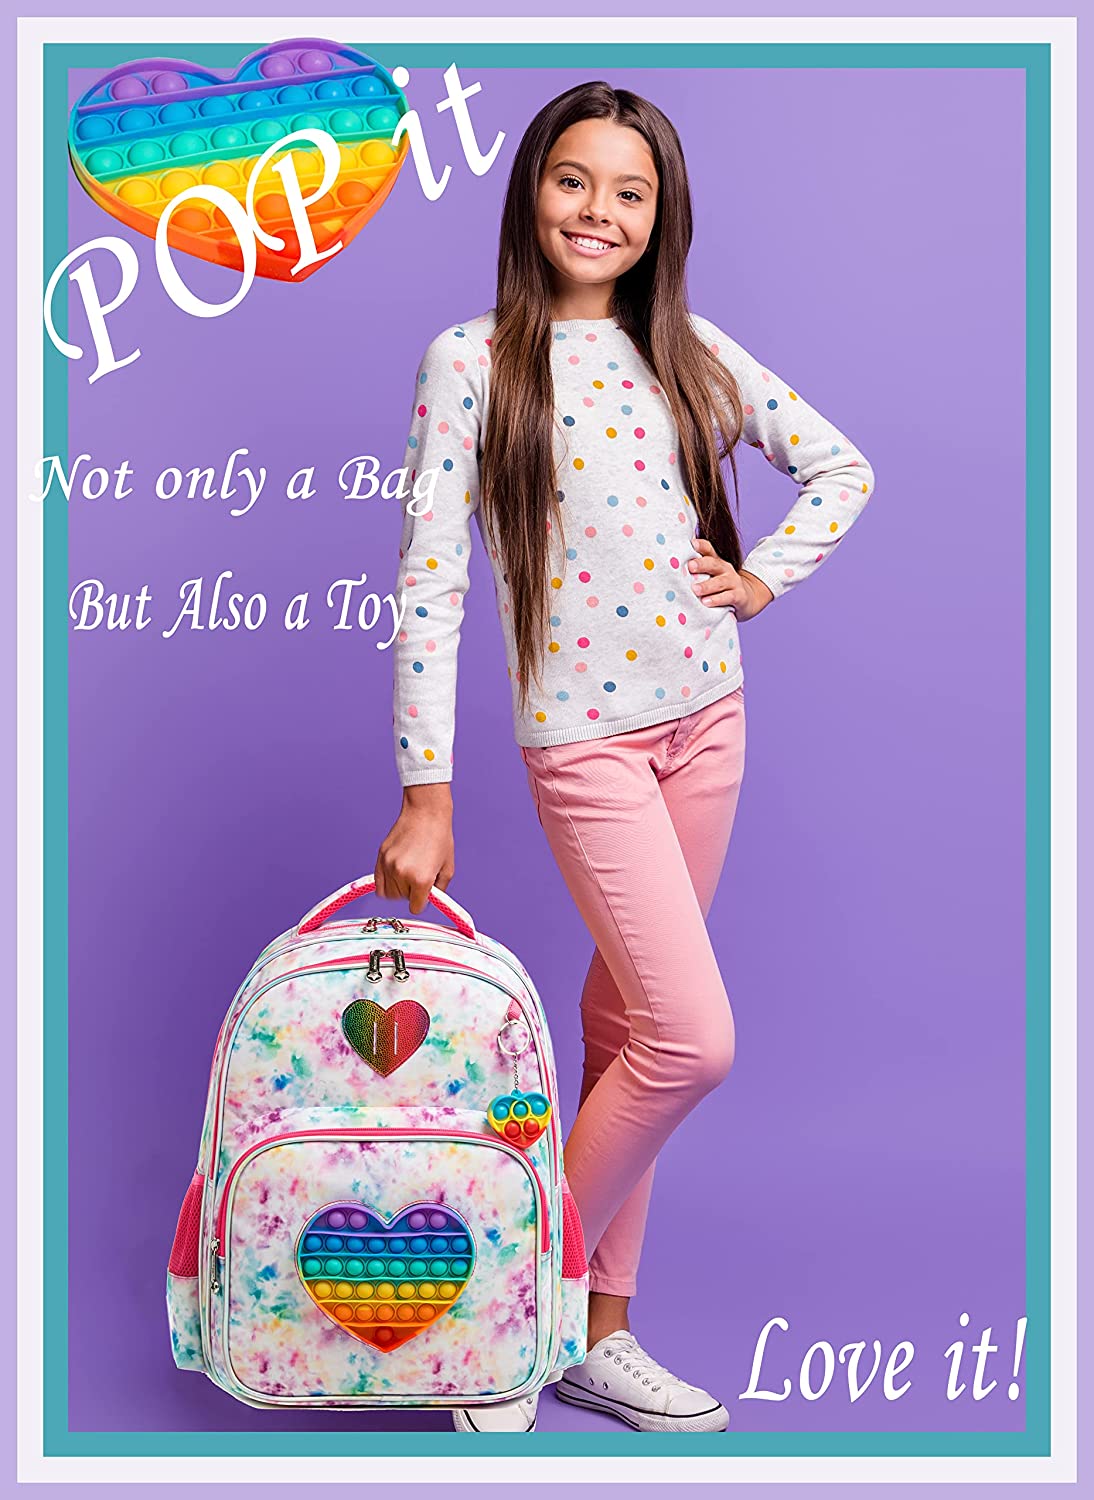 Bags 3 In 1 Kids Bags for Girls || Children School Bags for Girl || Bag Set with Pop It Push It - LittleCuckoo